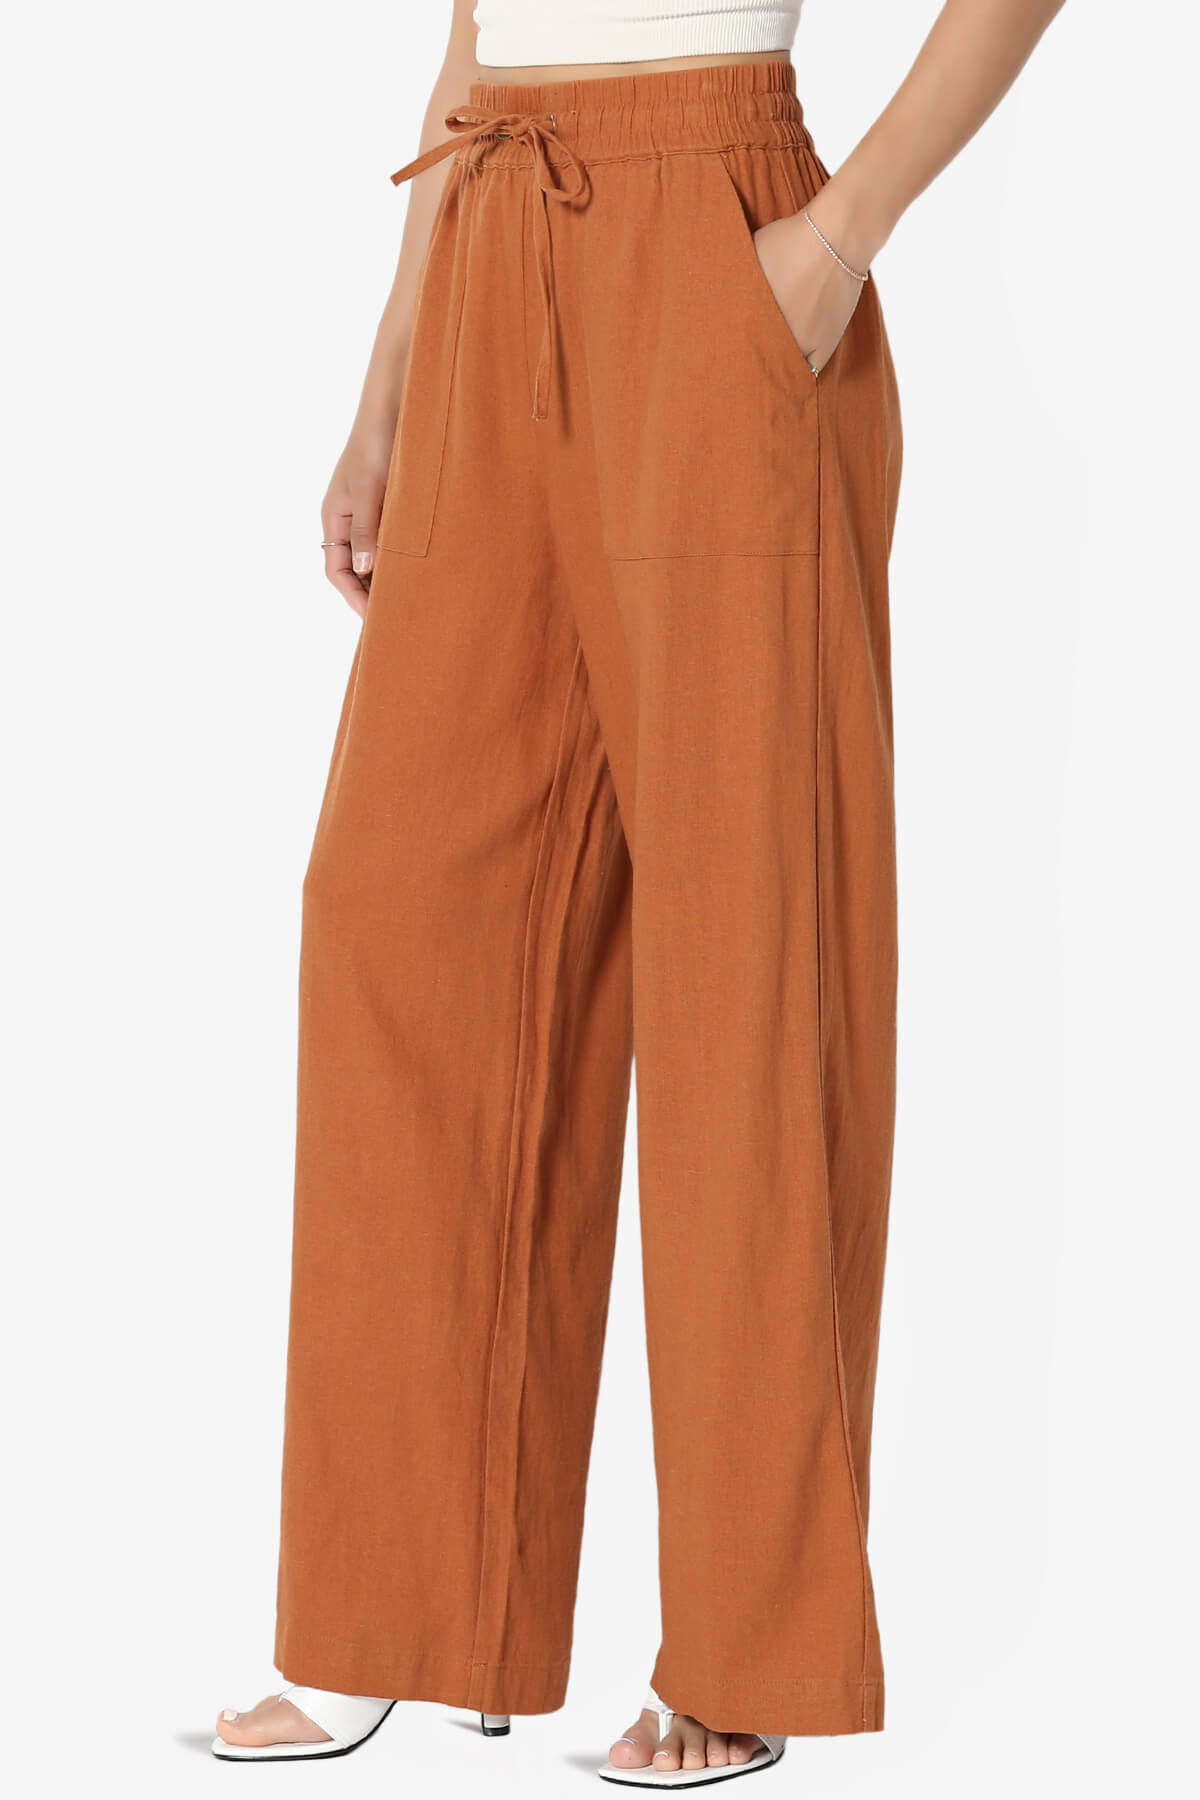 Load image into Gallery viewer, Swisher Drawstring Linen Pants ALMOND_3
